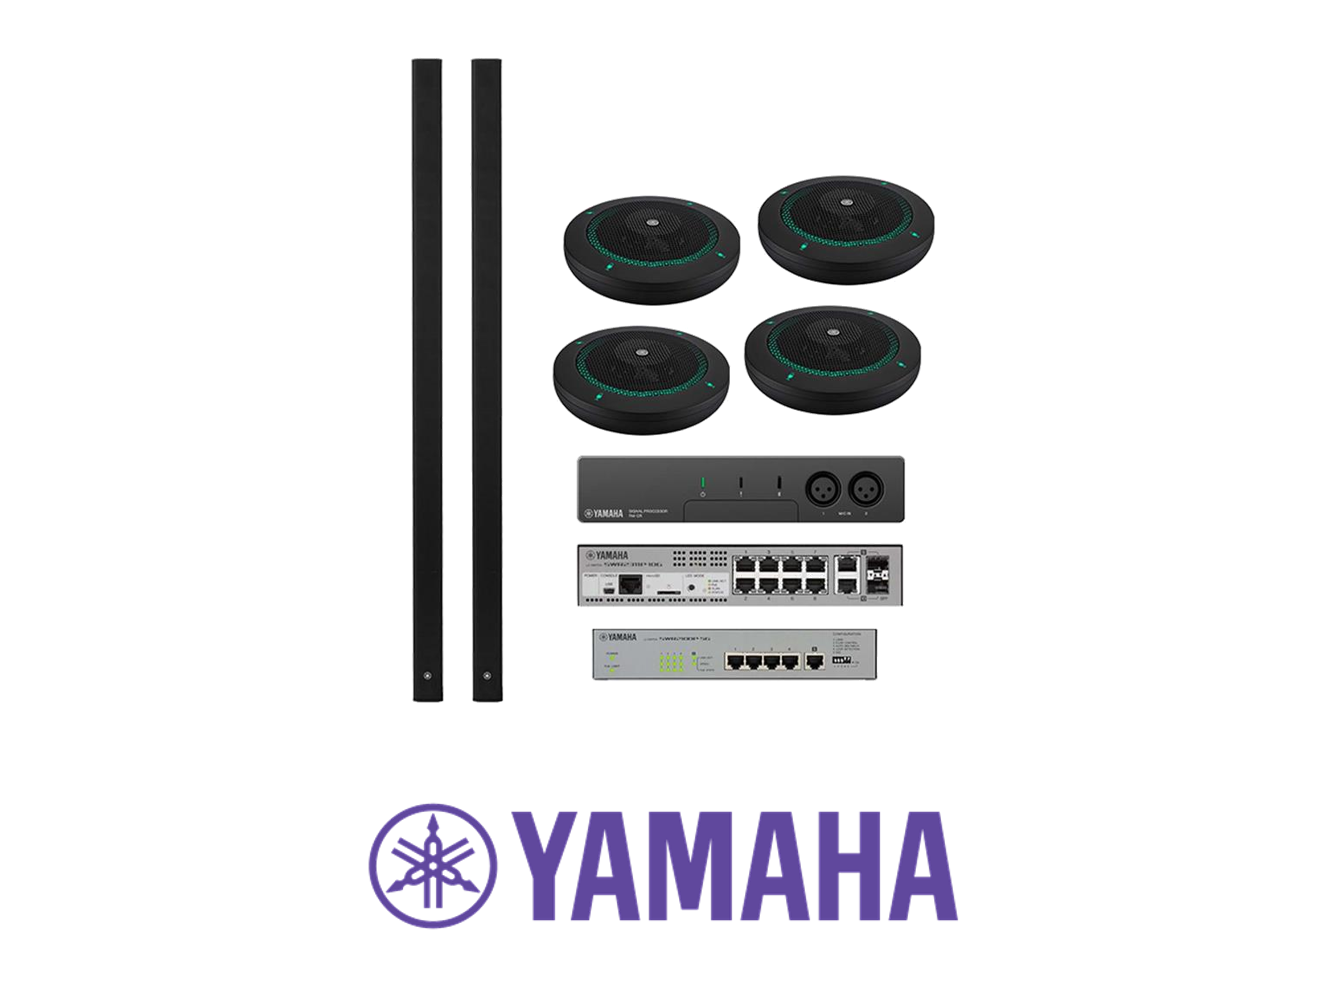 Yamaha ADECIA Solution for Zoom Rooms